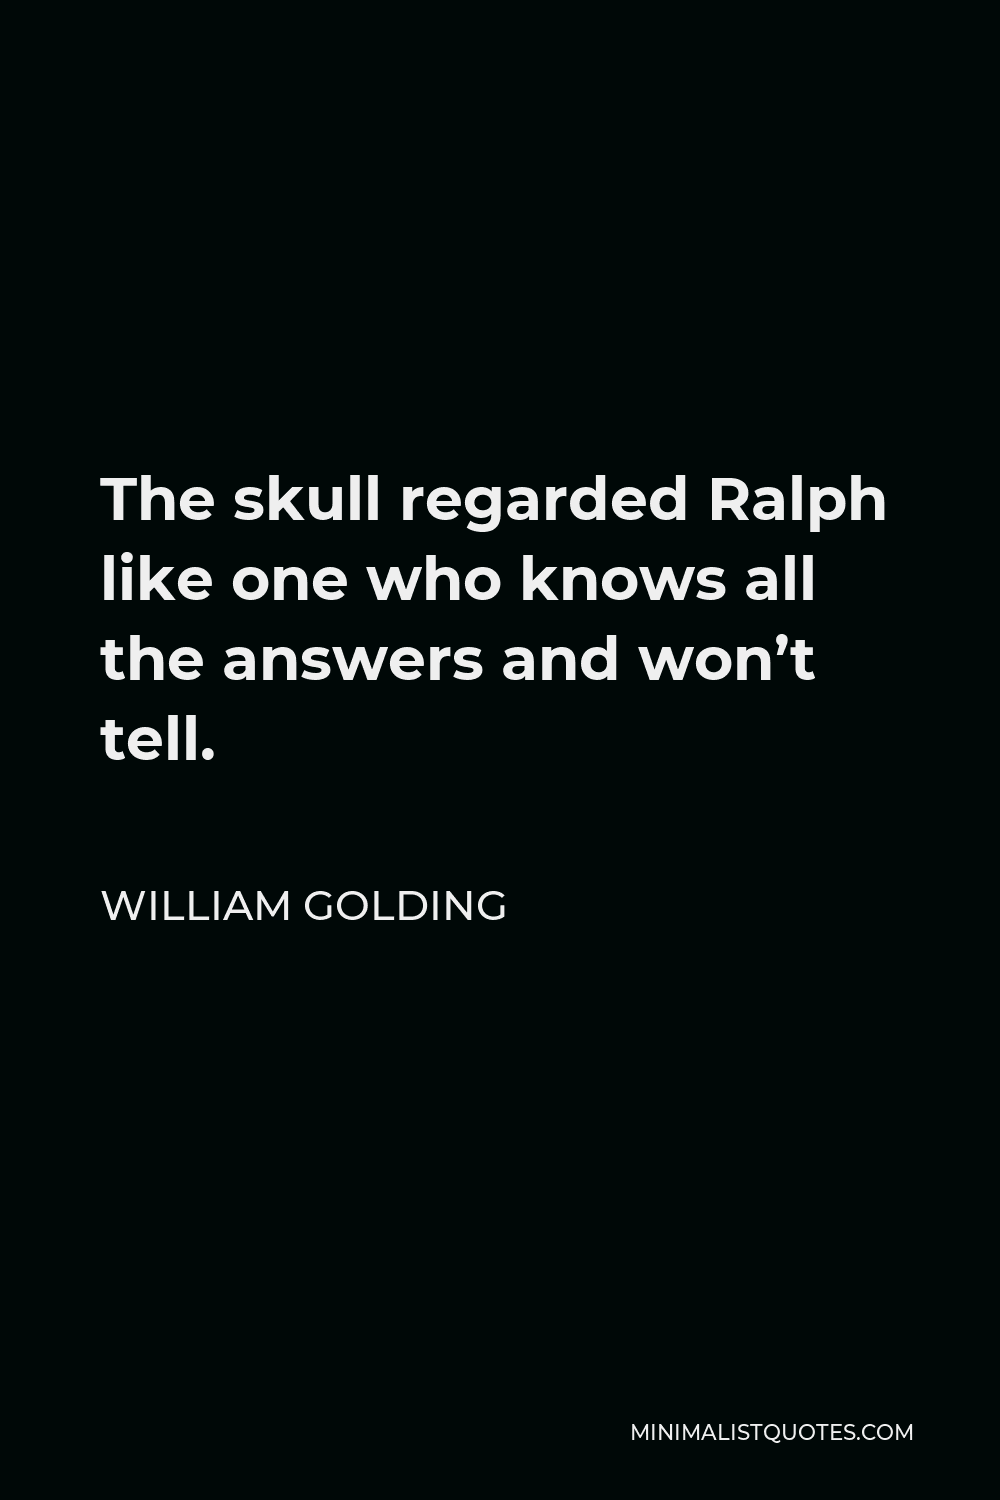 William Golding Quote - The skull regarded Ralph like one who knows all the answers and won’t tell.